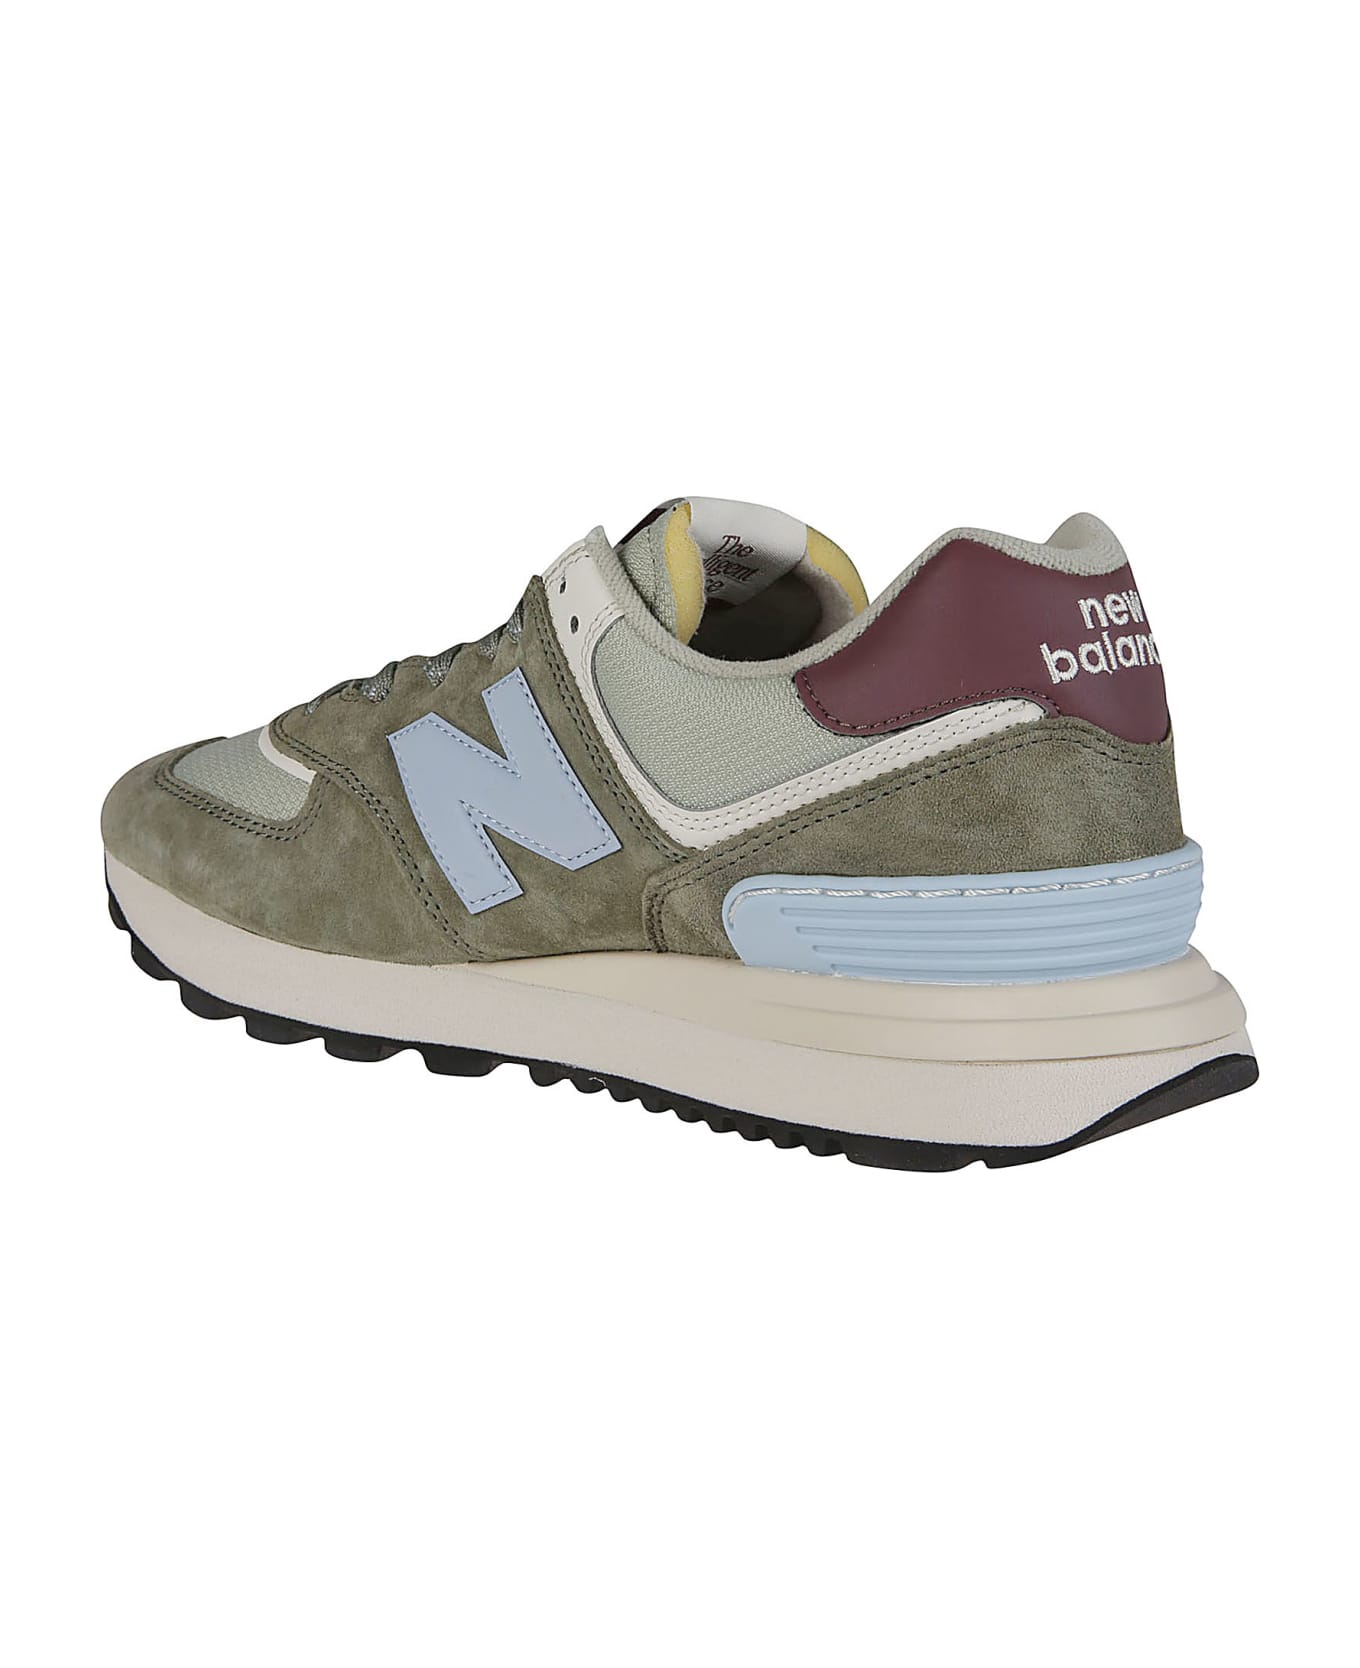 New Balance 574 Sneakers - Deep Olive